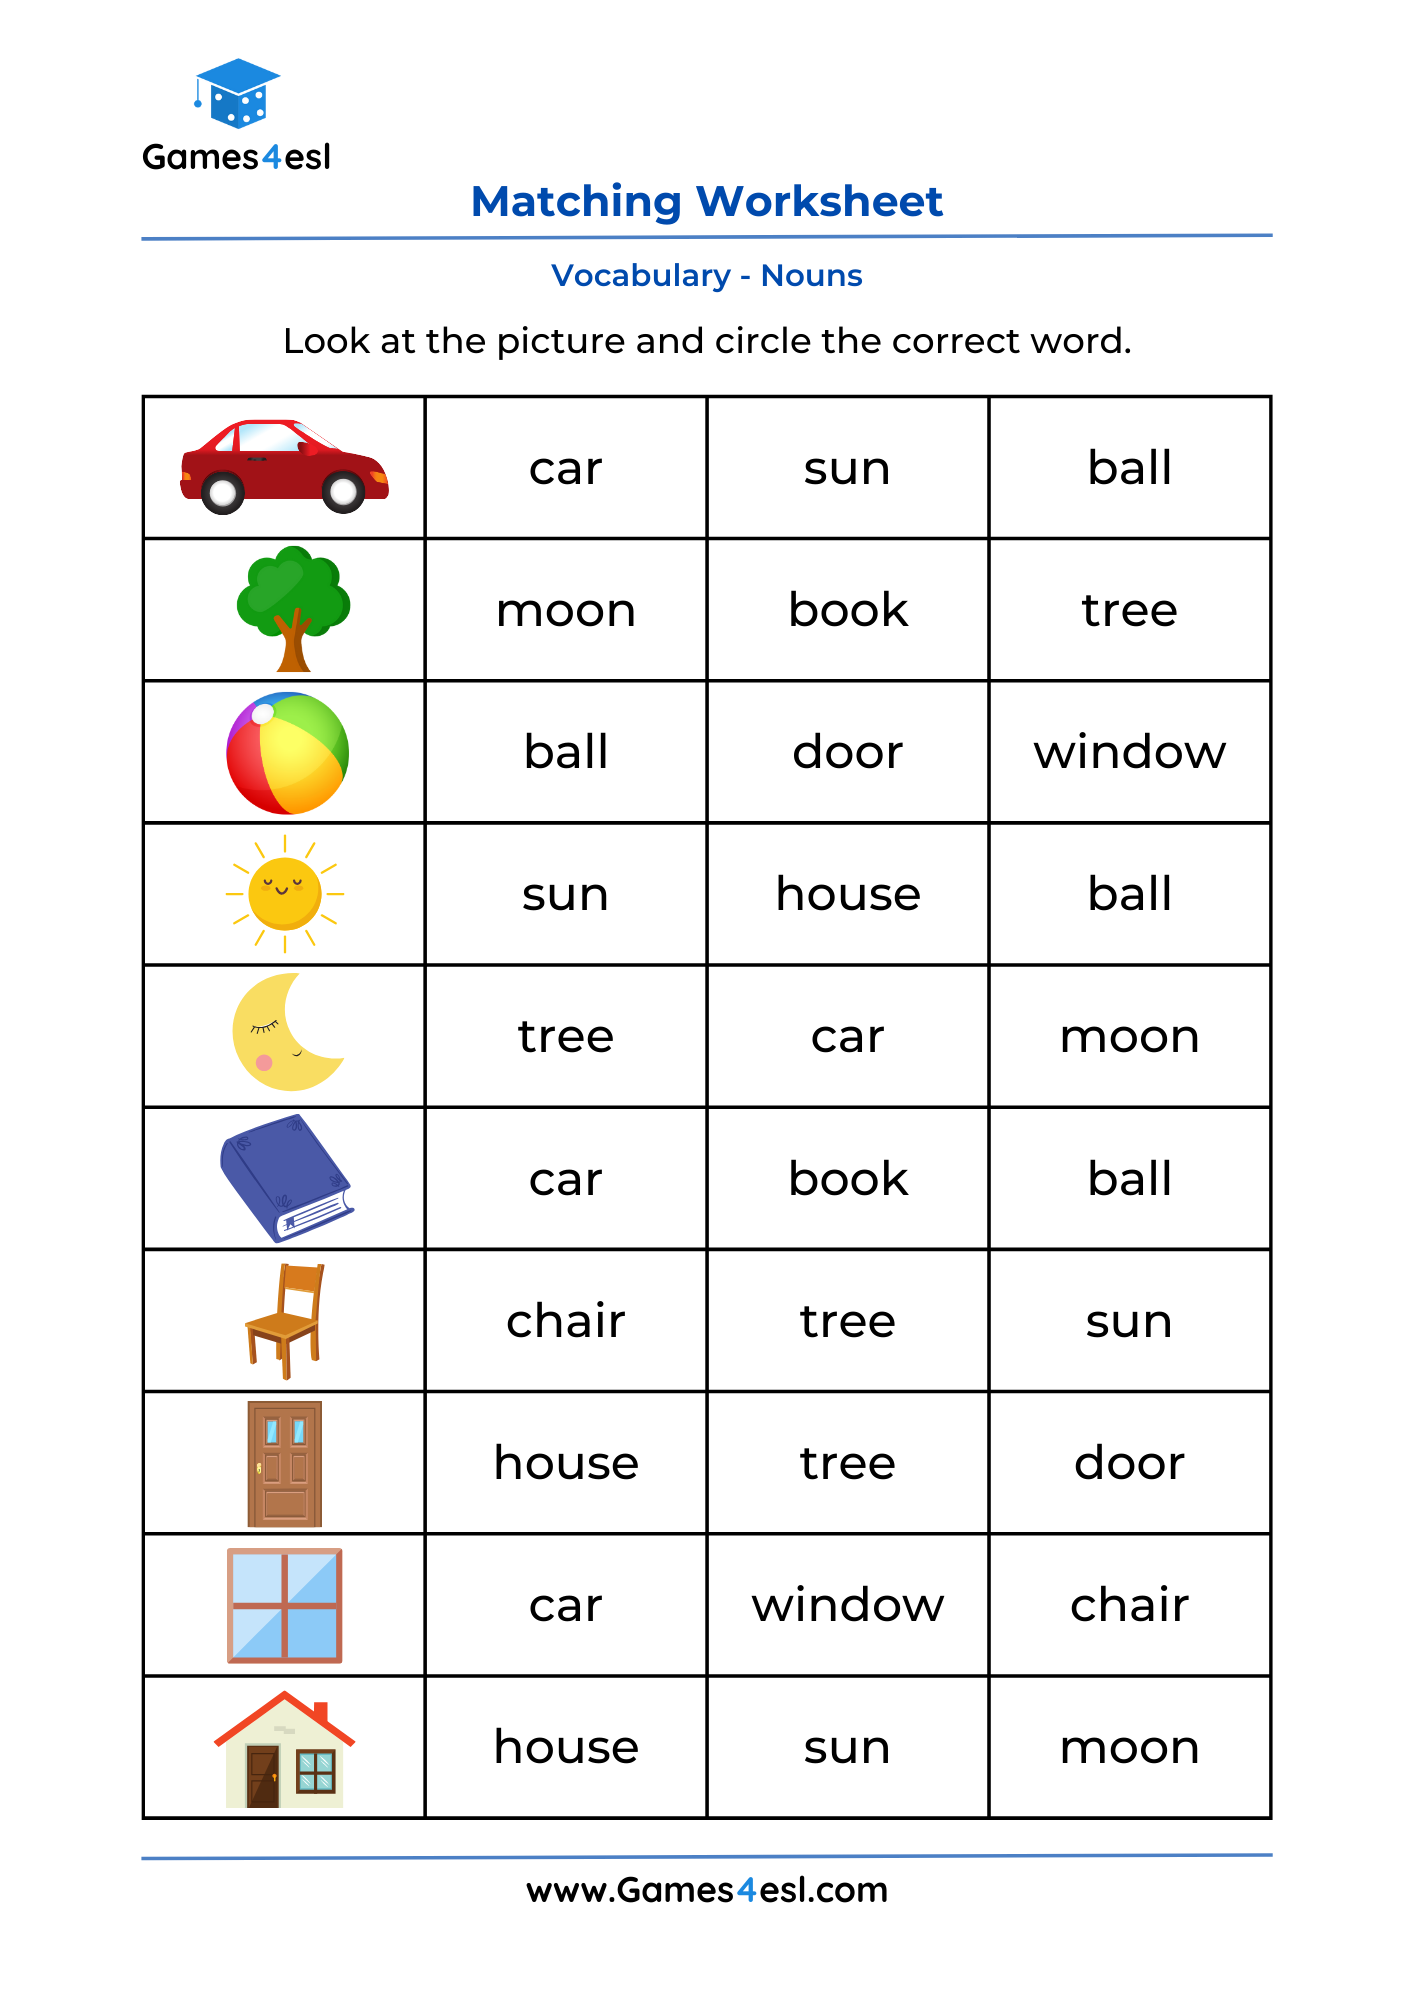 A matching worksheet for grade 1 students.